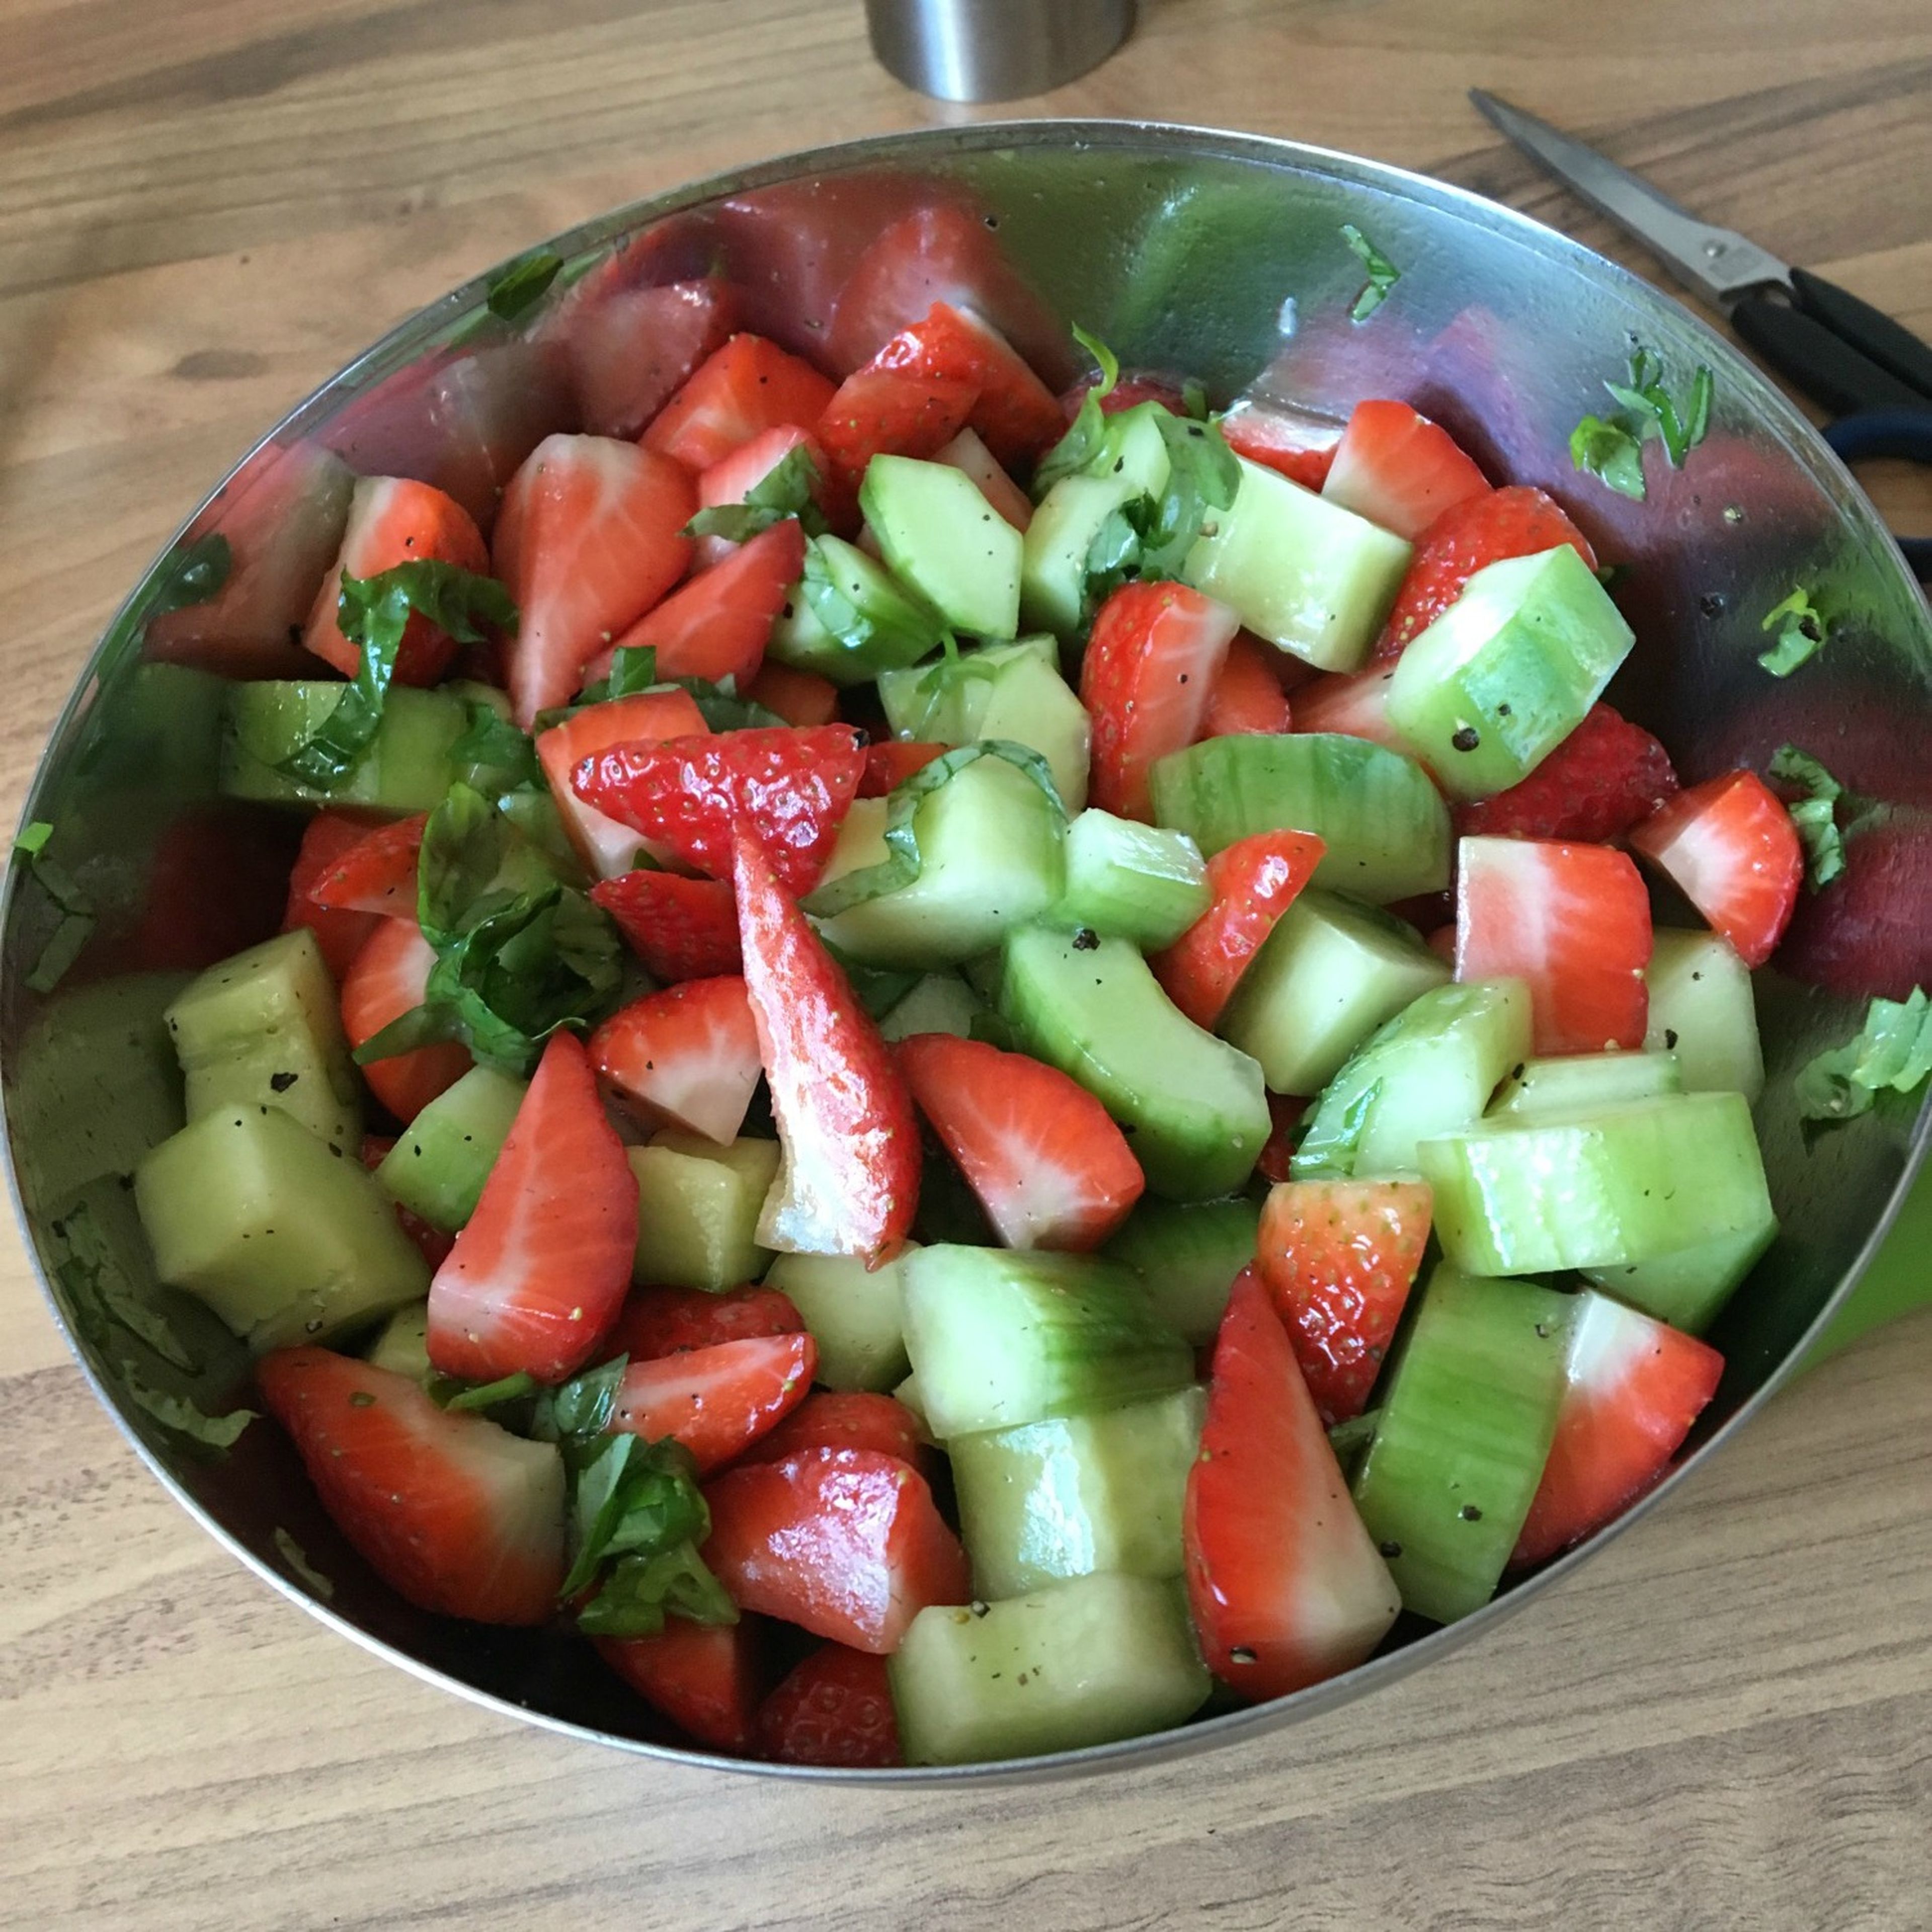 Strawberry and cucumber salad